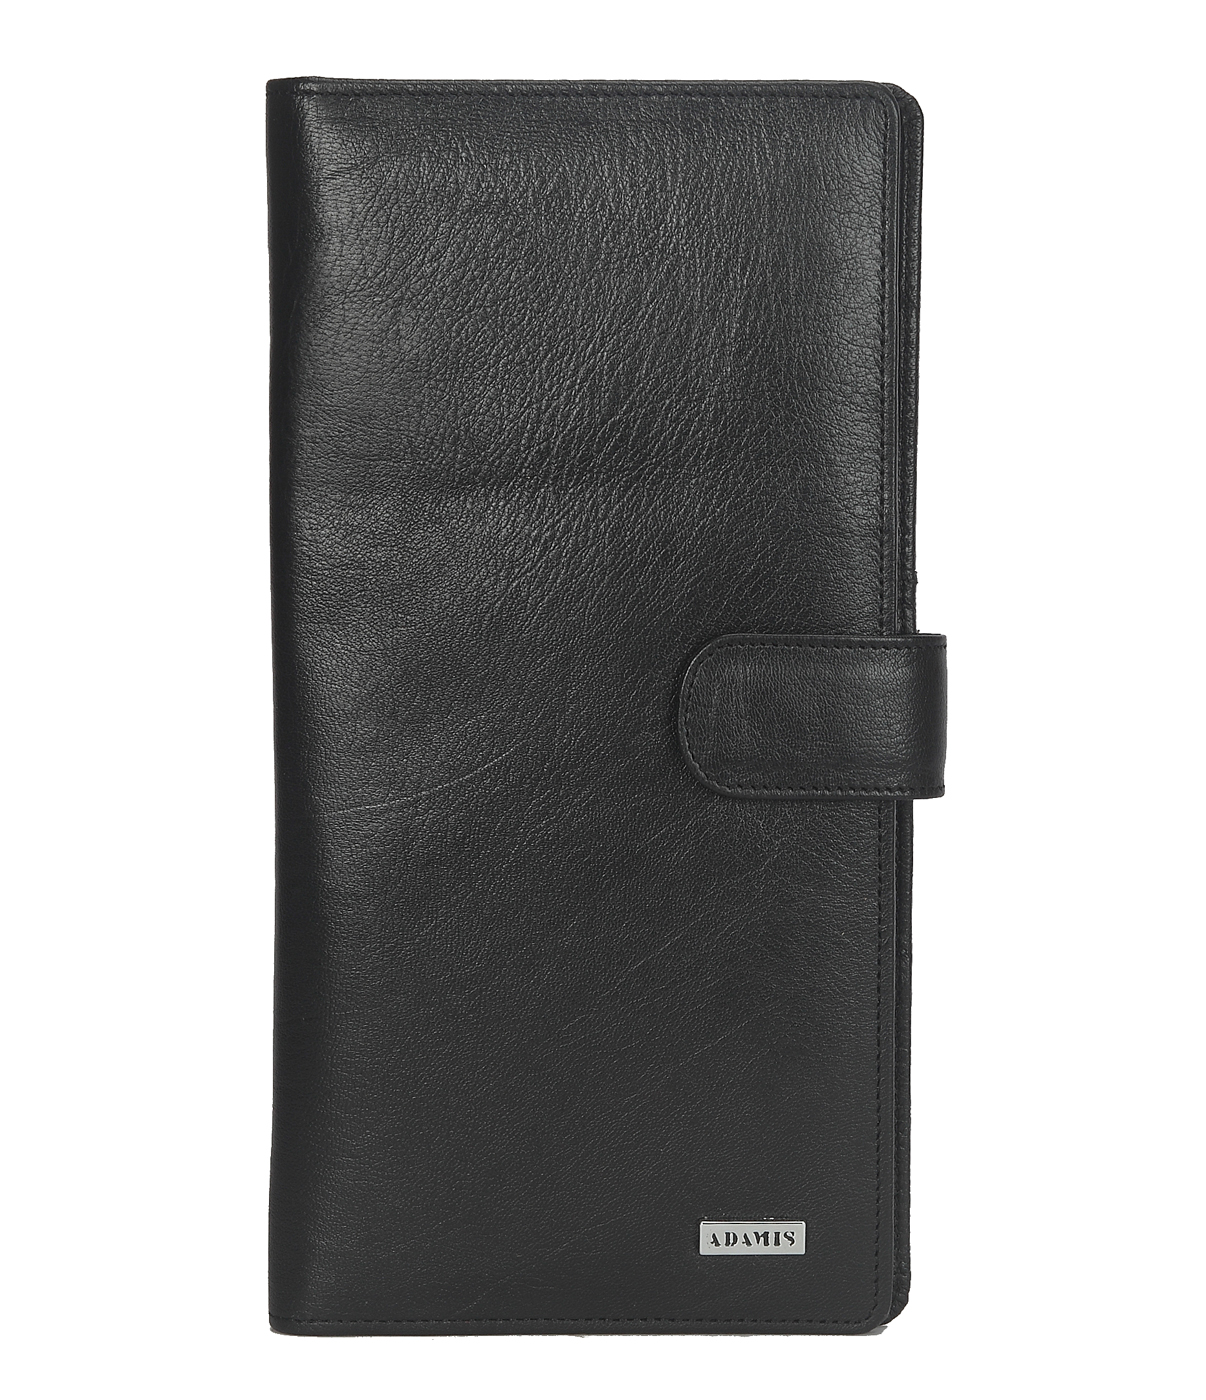 W247-Cynthia-Unisex wallet for travel documents in Genuine Leather - Black